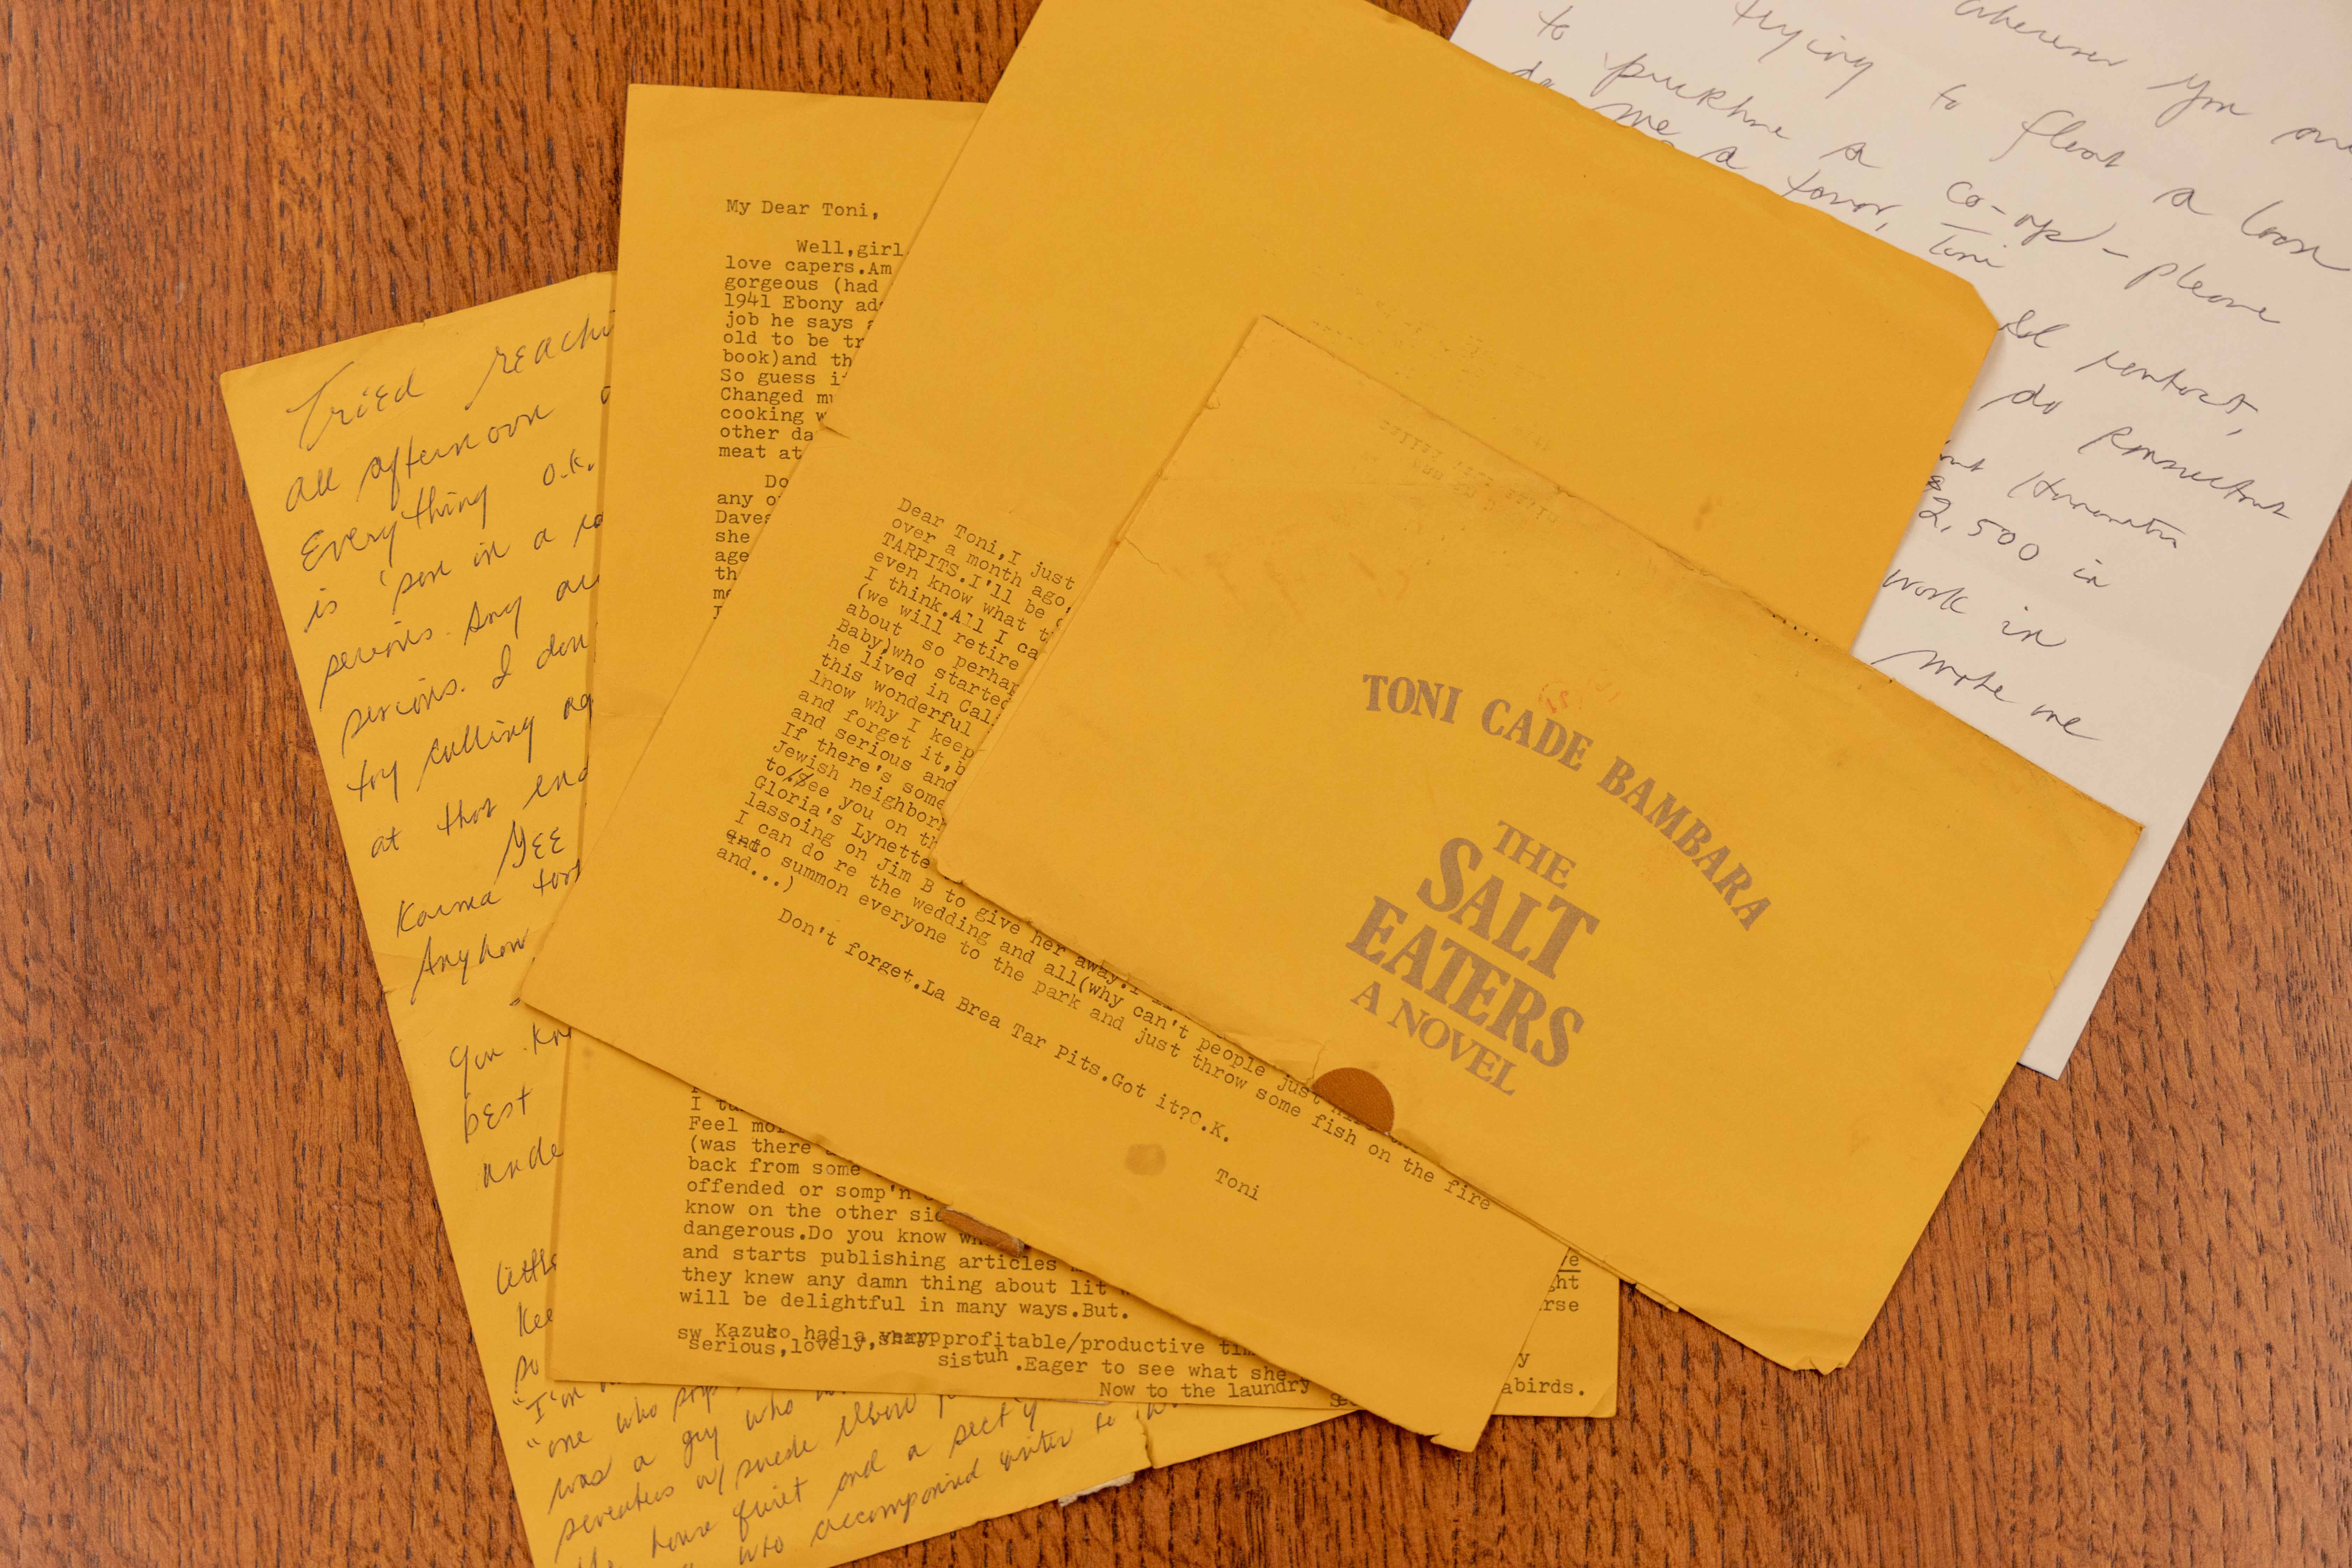 Select letters from Toni Cade Bambara to Toni Morrison, circa 1980s. From Toni Morrison Papers at Princeton University Library